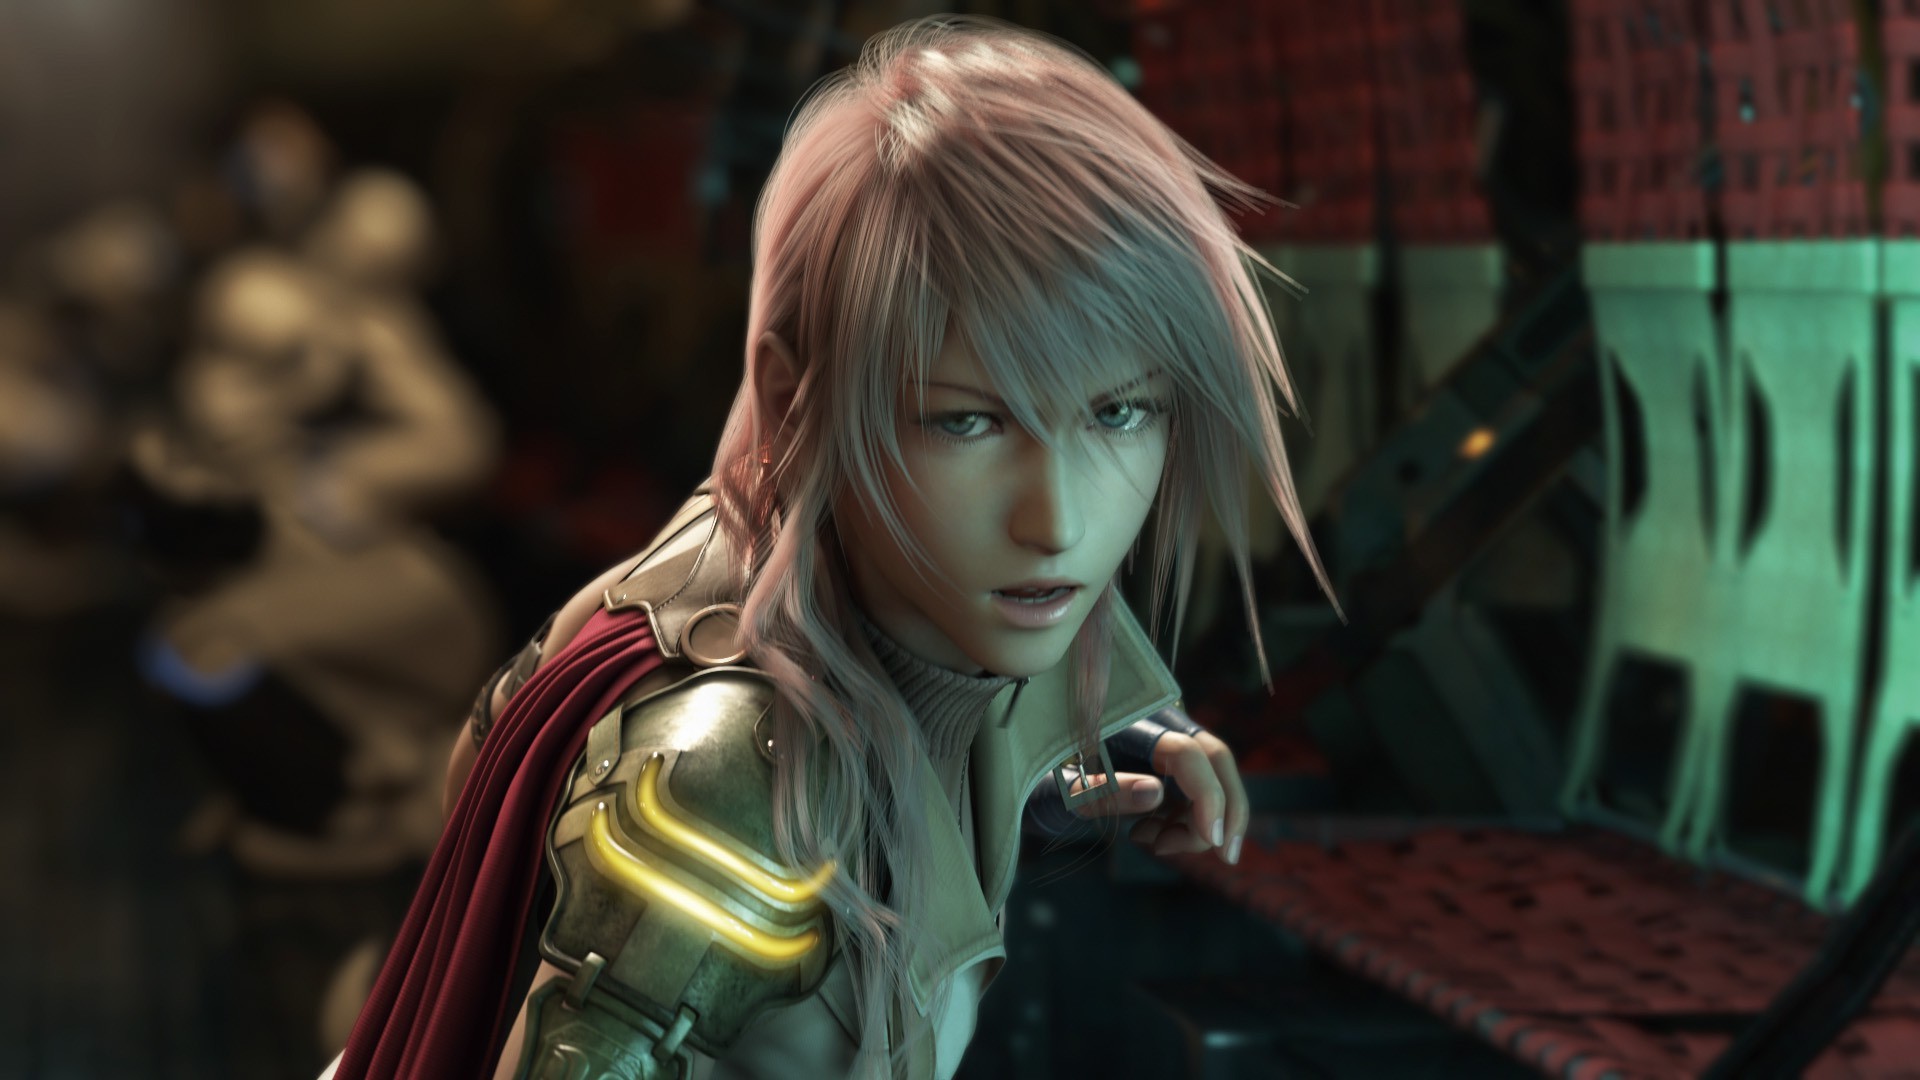 1920x1080 Final Fantasy, Final Fantasy XIII, Claire Farron, Video Games, Lightning  Wallpapers HD / Desktop and Mobile Backgrounds